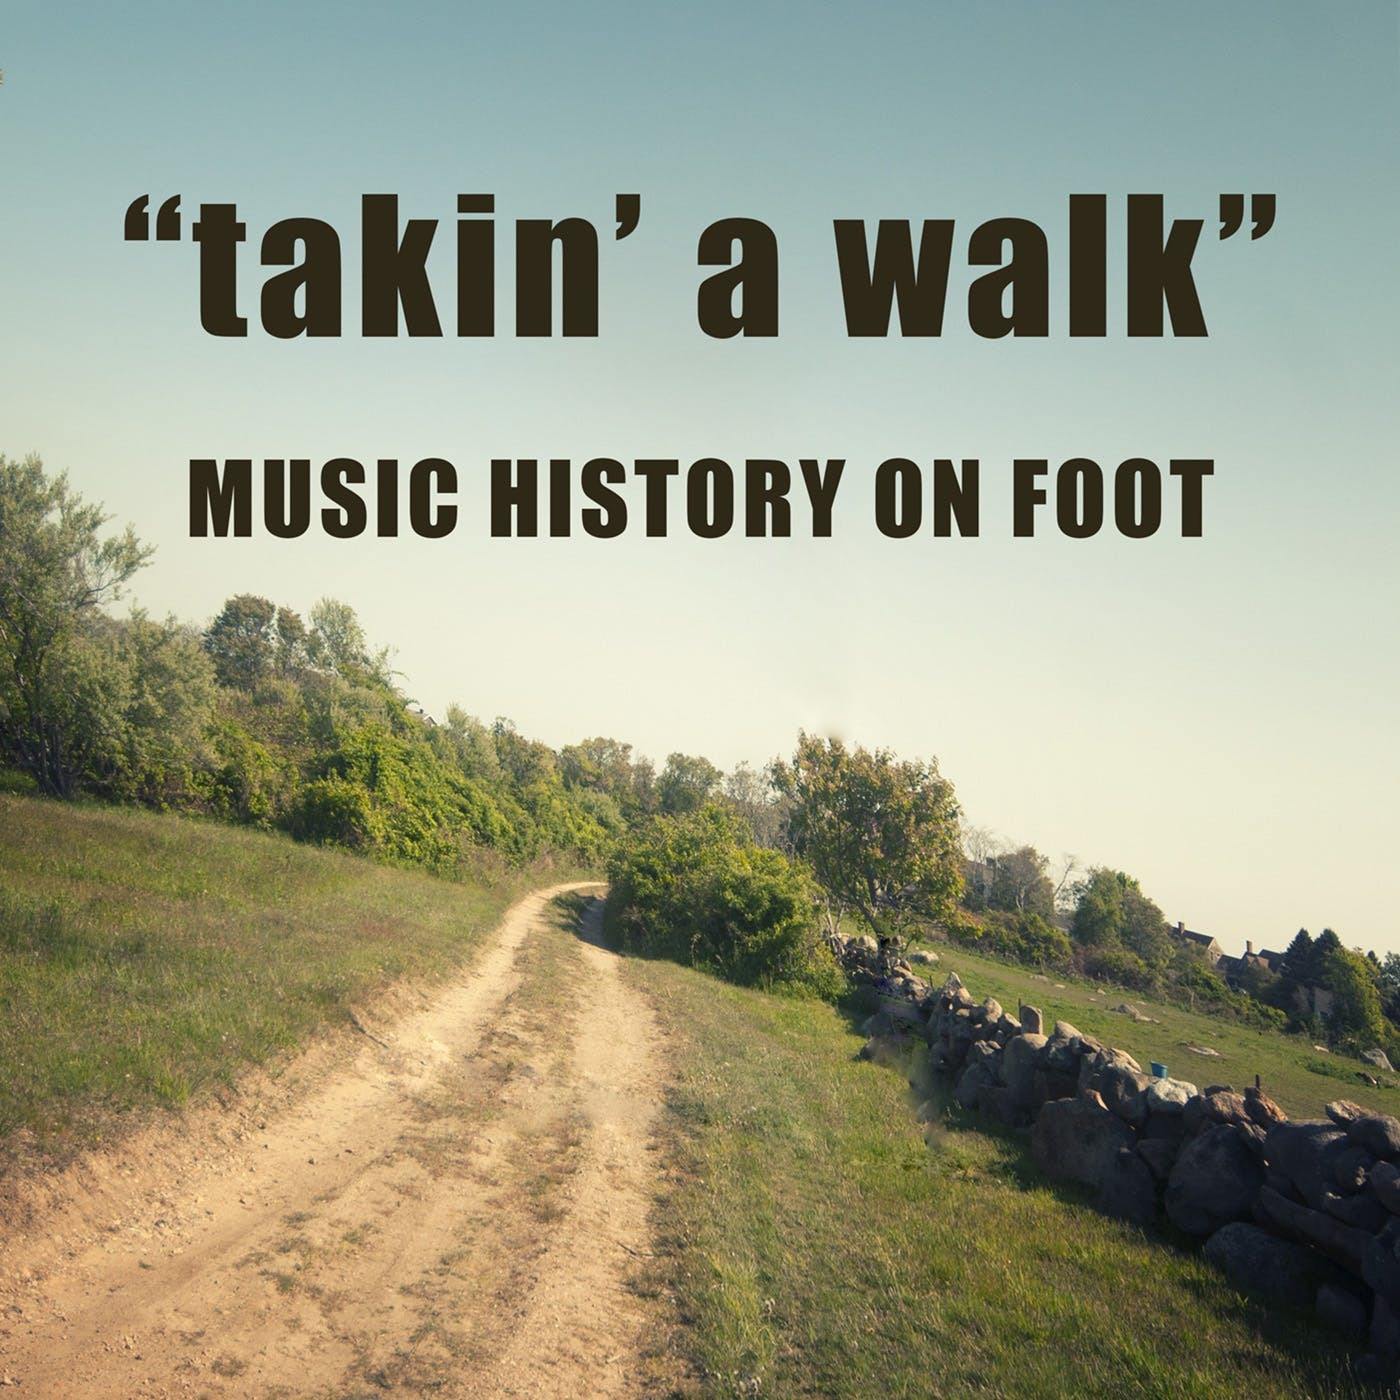 The Art of Storytelling: A Conversation with Actor and Musician Charles Esten on Takin A Walk.